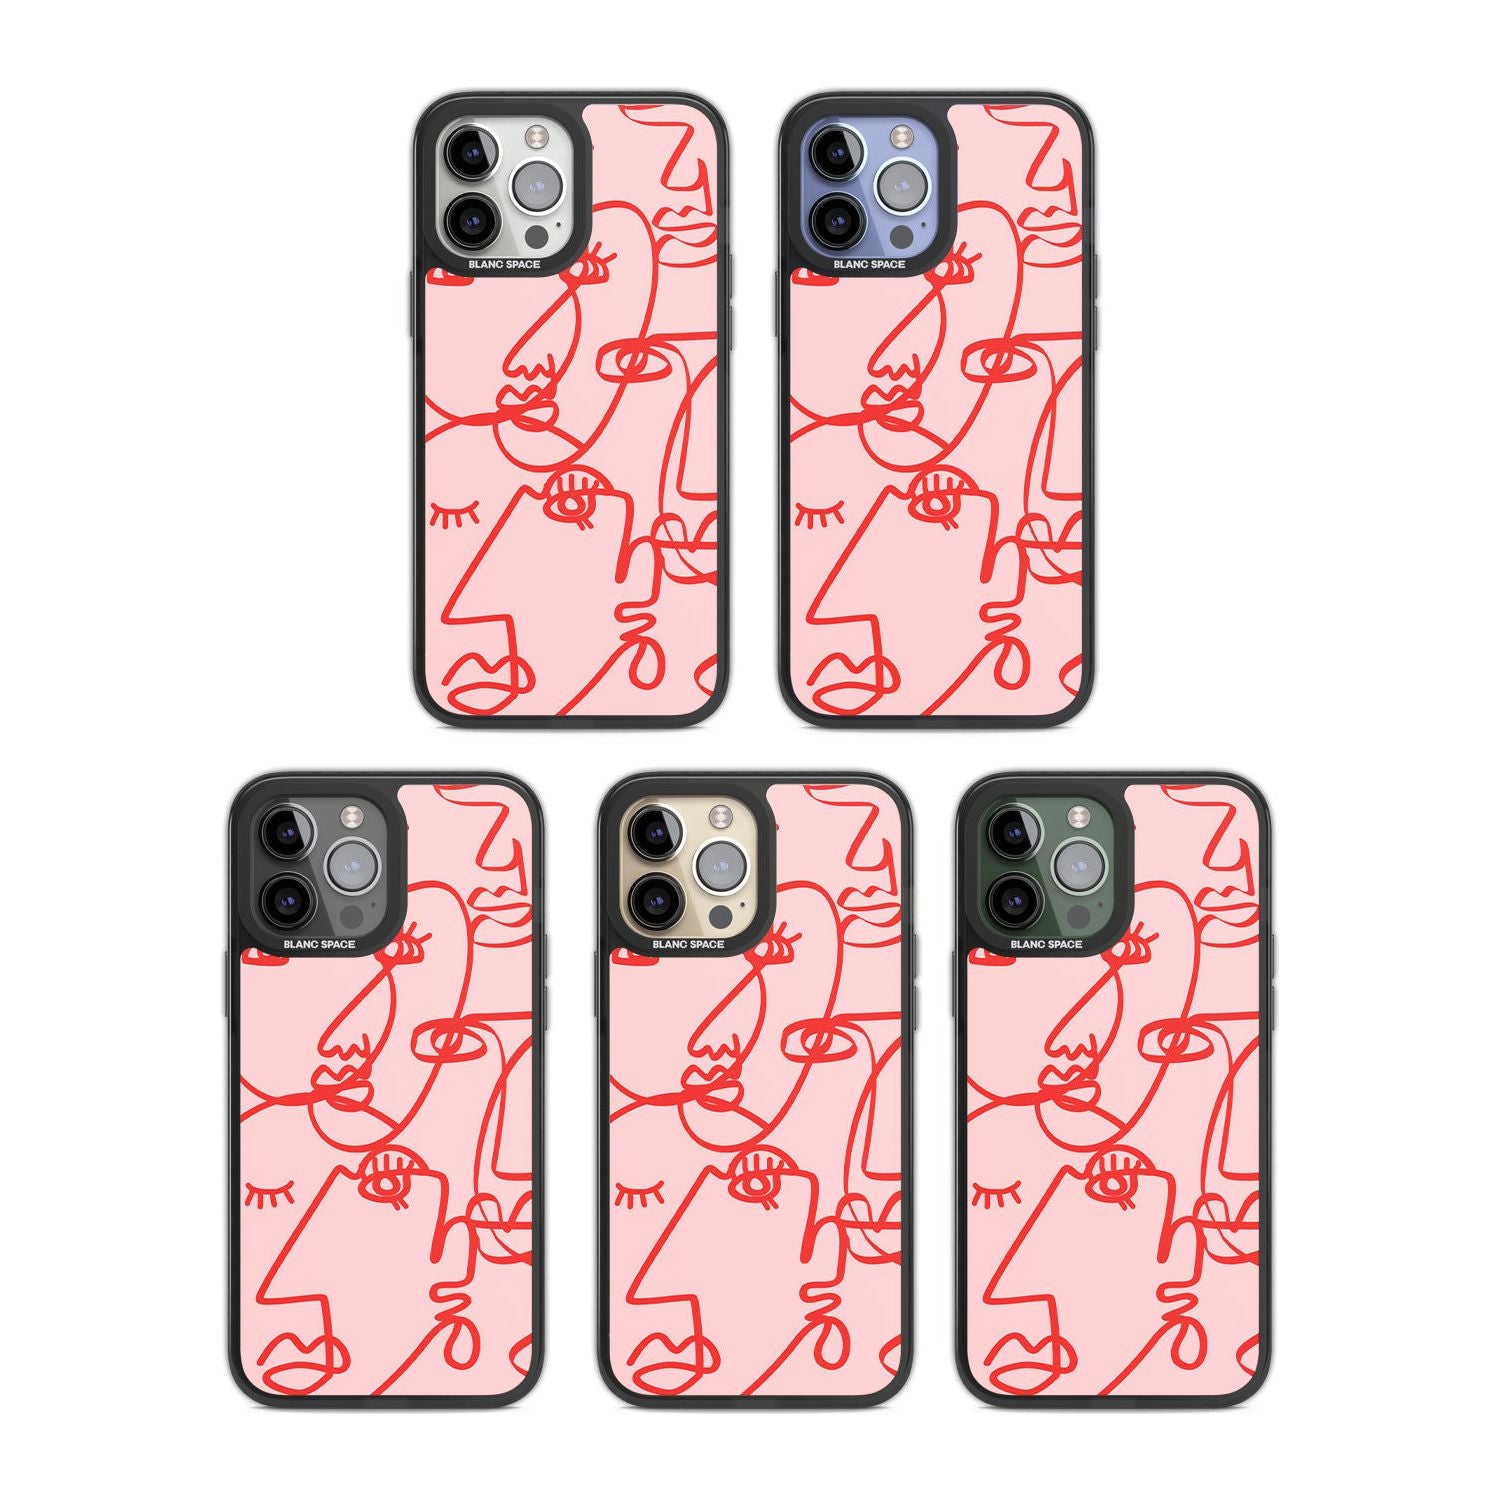 Abstract Continuous Line Faces Red on Pink Phone Case iPhone 15 Pro Max / Black Impact Case,iPhone 15 Plus / Black Impact Case,iPhone 15 Pro / Black Impact Case,iPhone 15 / Black Impact Case,iPhone 15 Pro Max / Impact Case,iPhone 15 Plus / Impact Case,iPhone 15 Pro / Impact Case,iPhone 15 / Impact Case,iPhone 15 Pro Max / Magsafe Black Impact Case,iPhone 15 Plus / Magsafe Black Impact Case,iPhone 15 Pro / Magsafe Black Impact Case,iPhone 15 / Magsafe Black Impact Case,iPhone 14 Pro Max / Black Impact Case,i